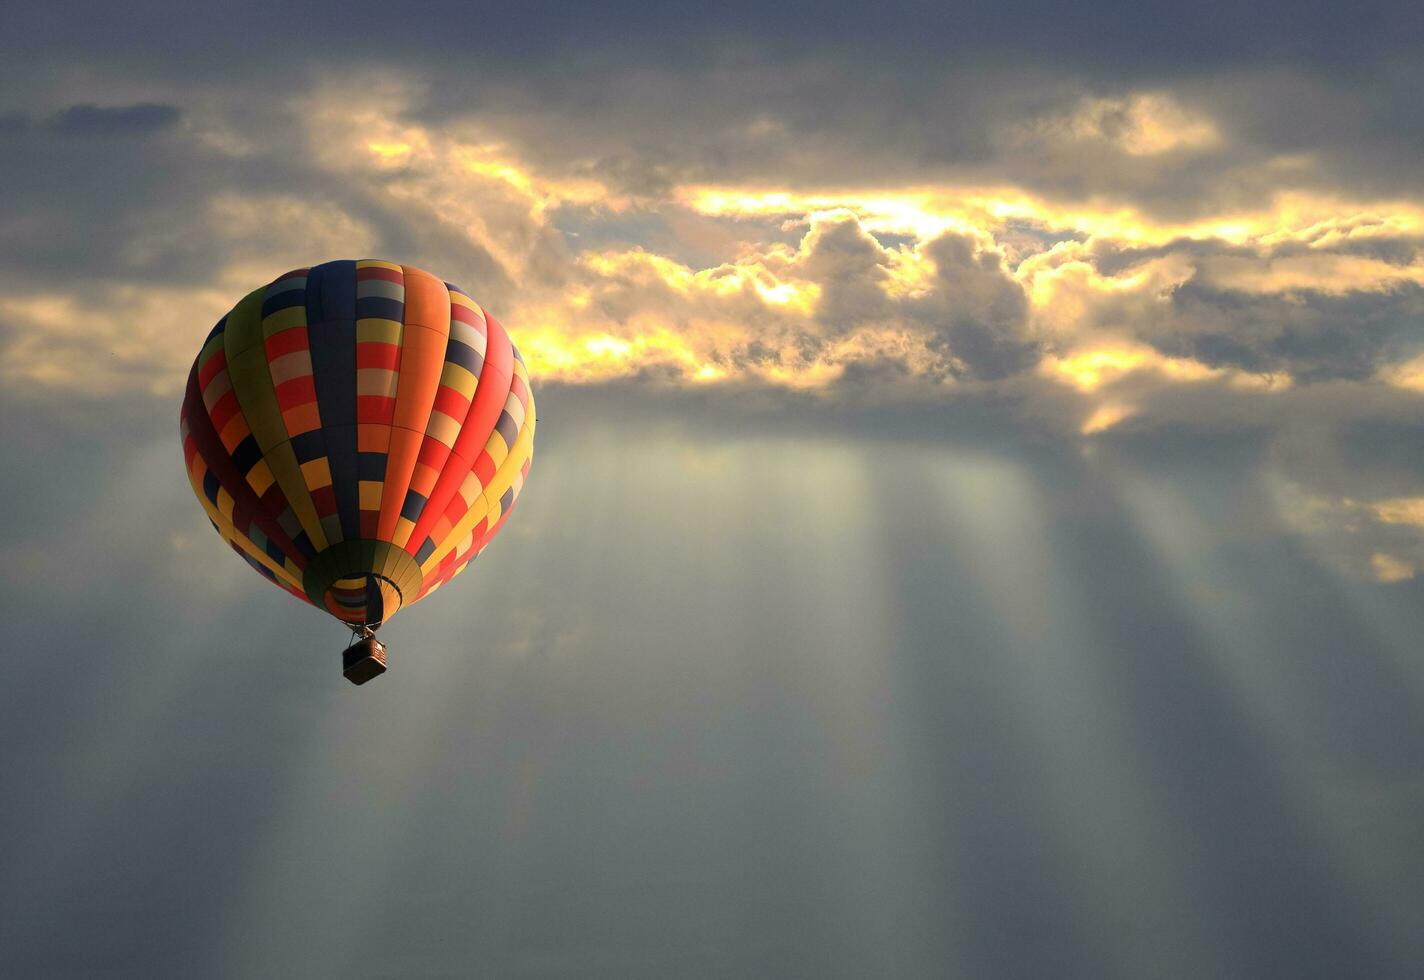 Hot air balloon in the sunset sky photo